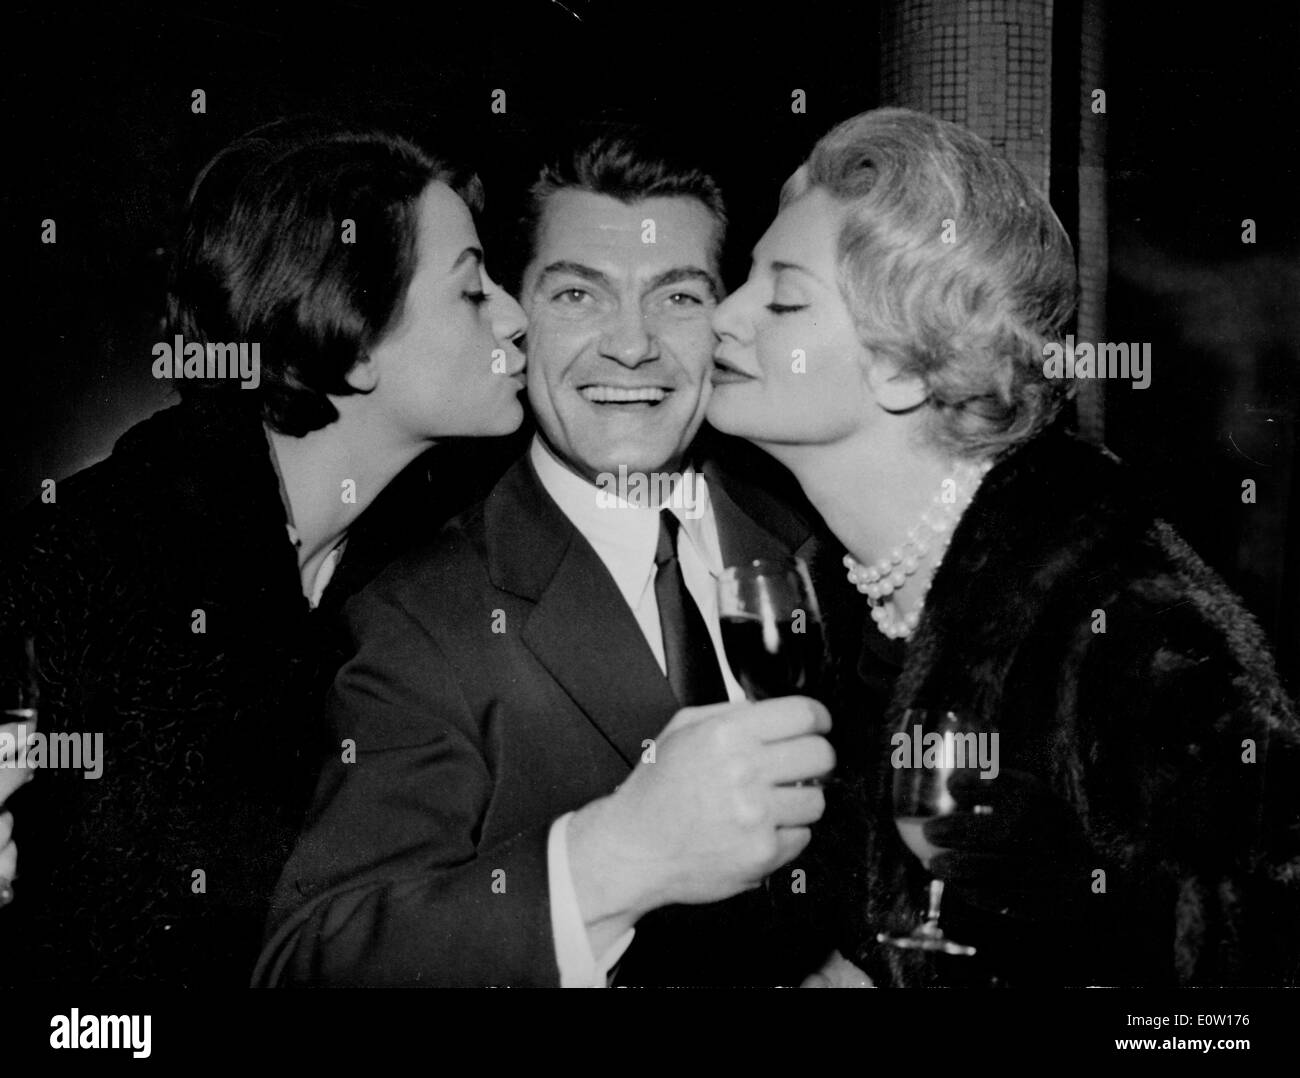 Actor Jean Marais getting kisses from friends Stock Photo